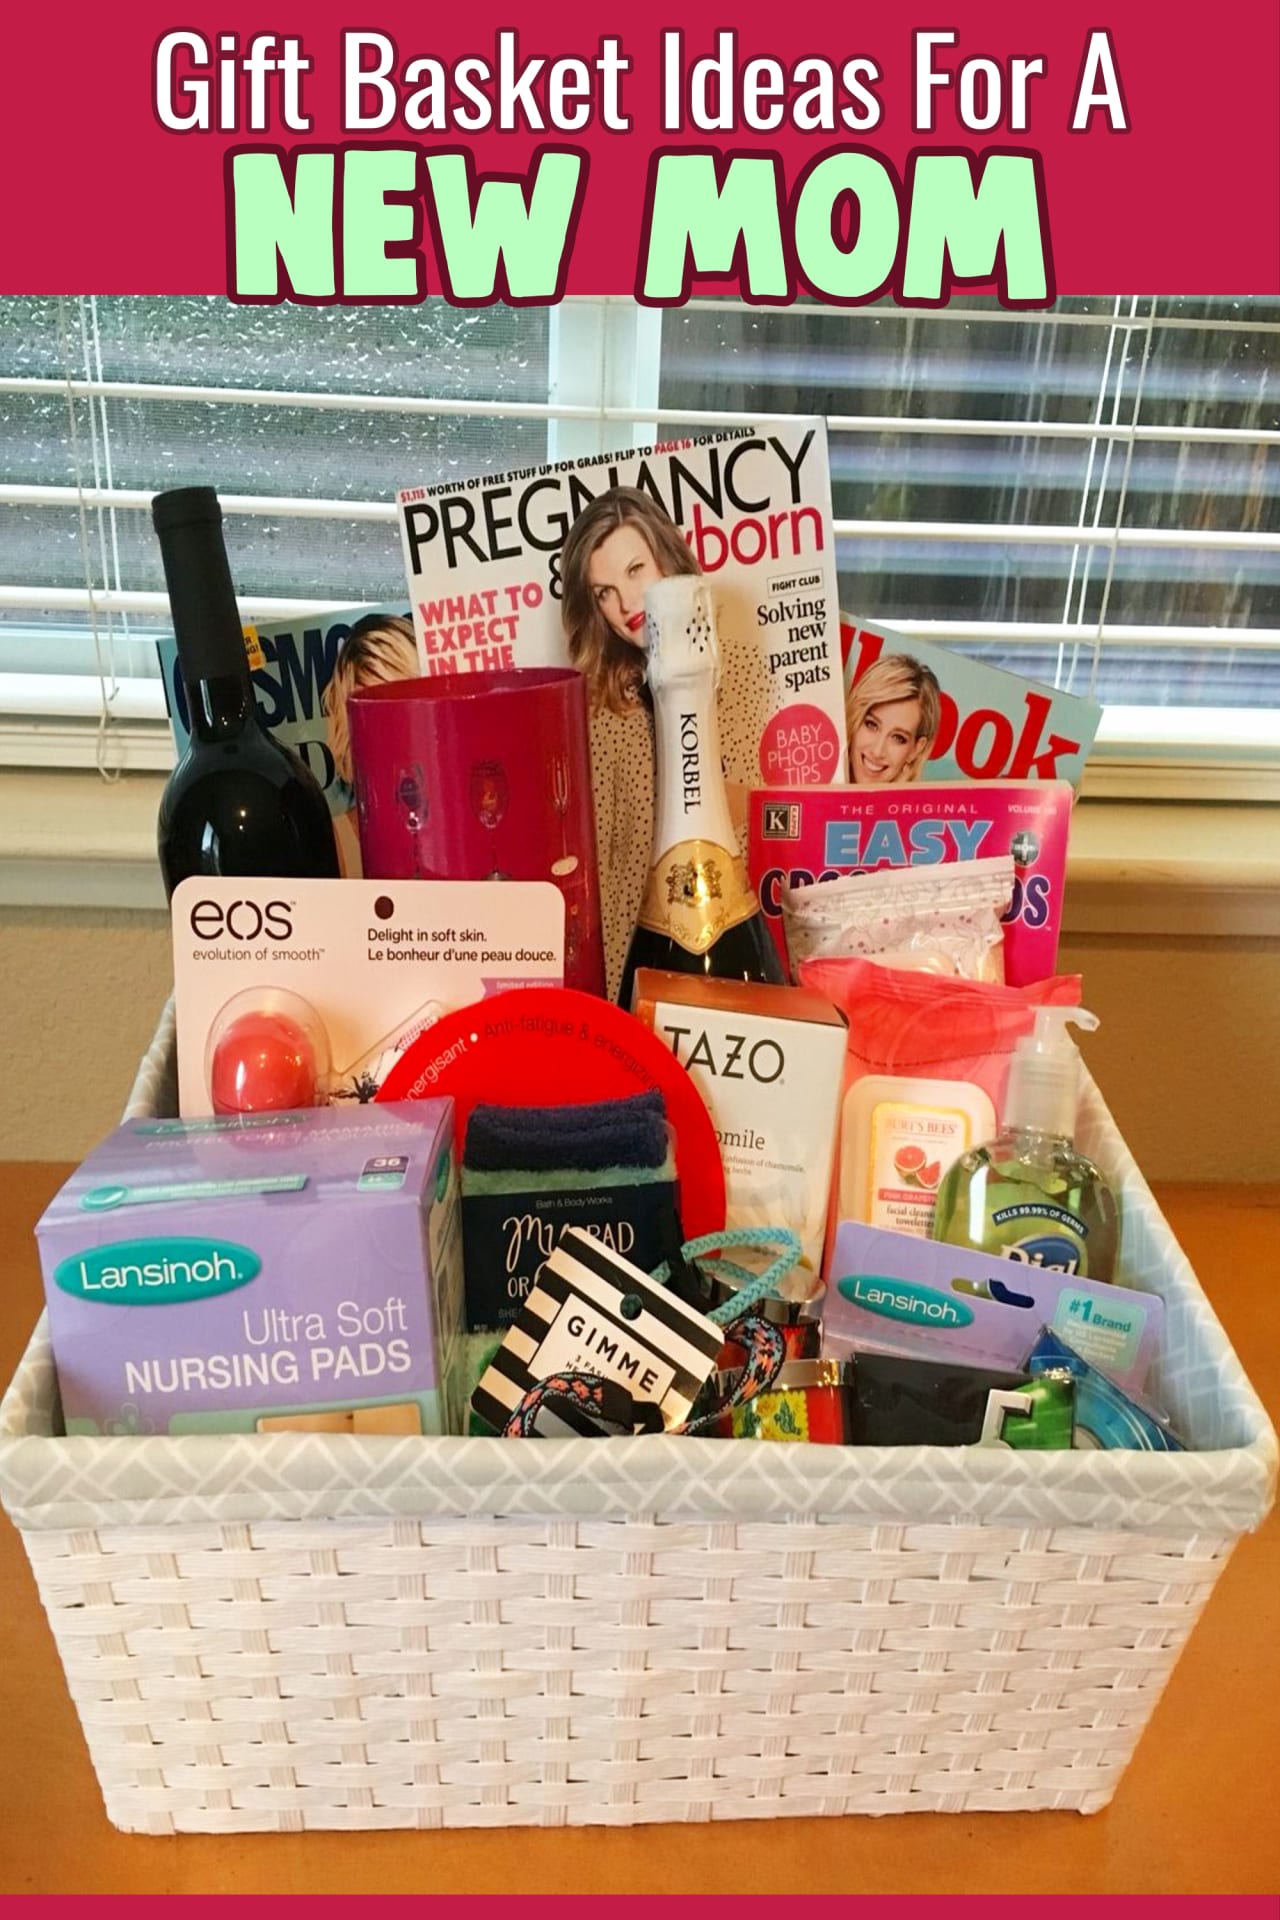 Handmade gift basket ideas for a new mom (mom-to-be) Best baby gifts! Baby shower gifts for mom not baby - unique baby shower gifts for mom to be - non baby gifts for new moms - practical baby shower gifts and trendy baby gifts and more best baby gifts for new moms